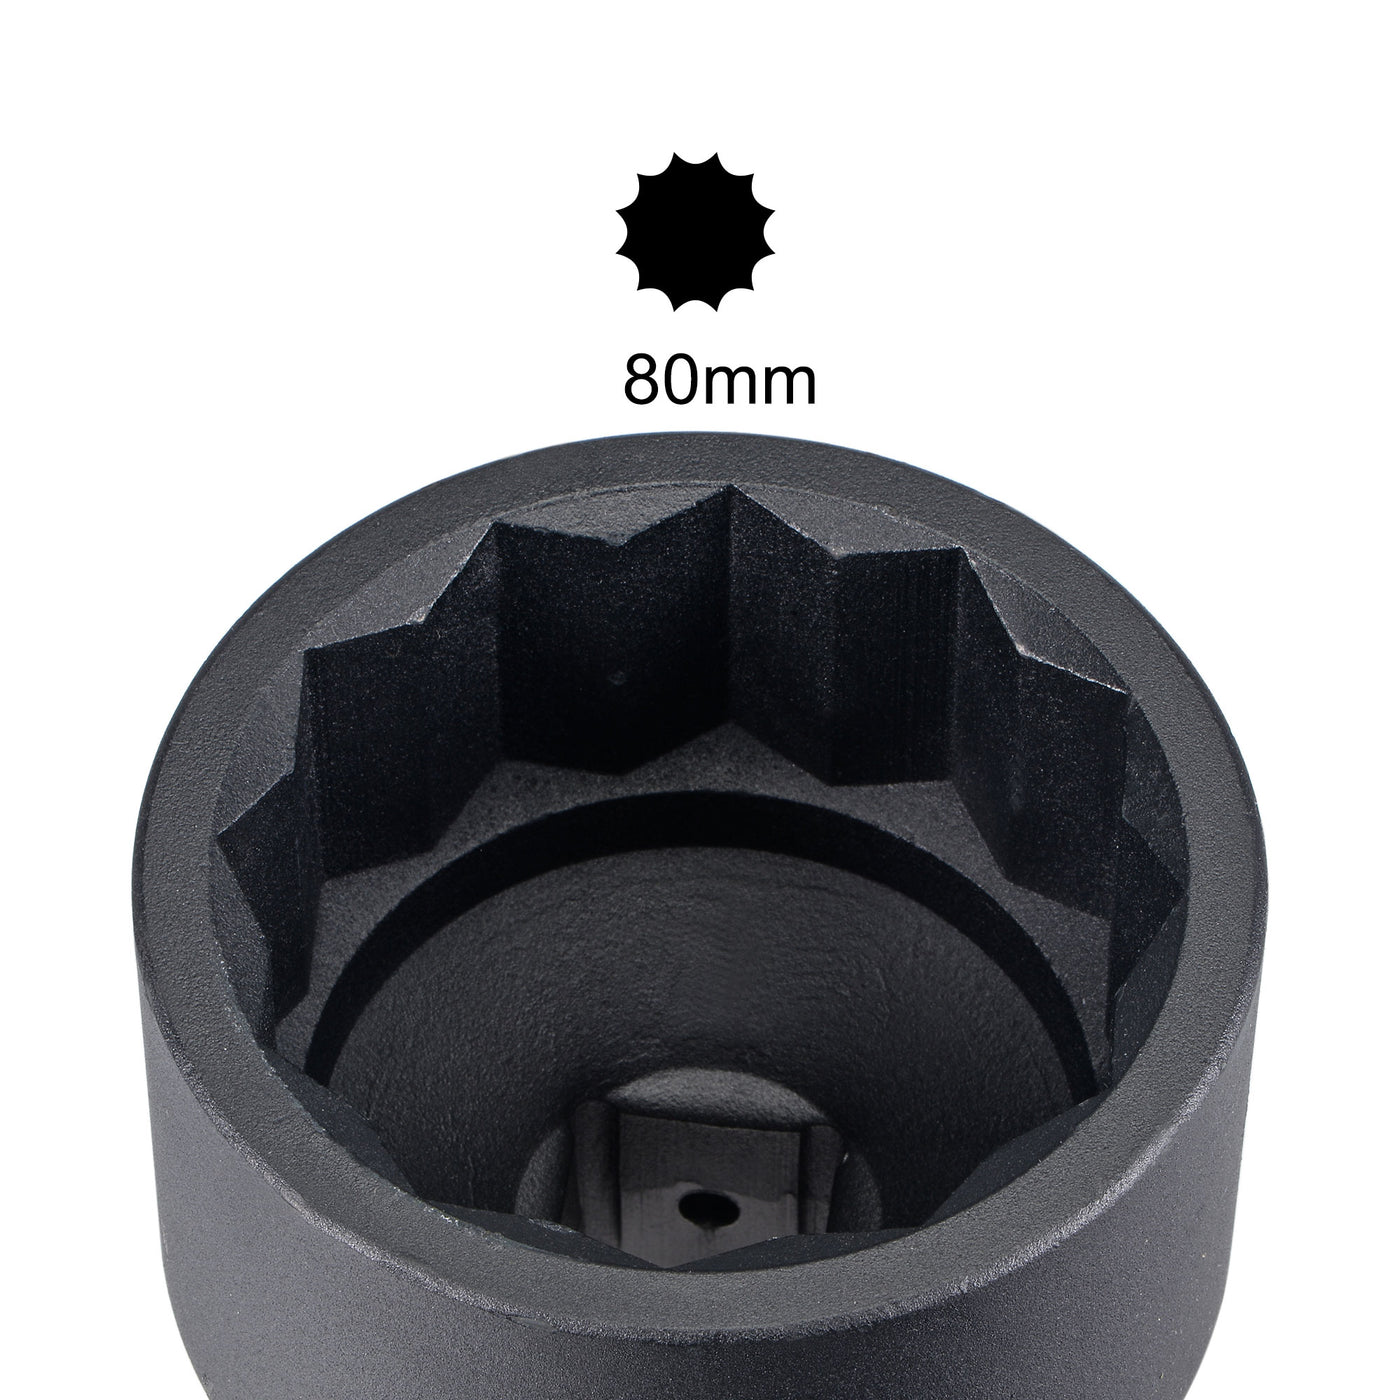 uxcell Uxcell 1-Inch Drive 80mm 12-Point Impact Socket, CR-MO Steel 100mm Length, Standard Metric Sizes